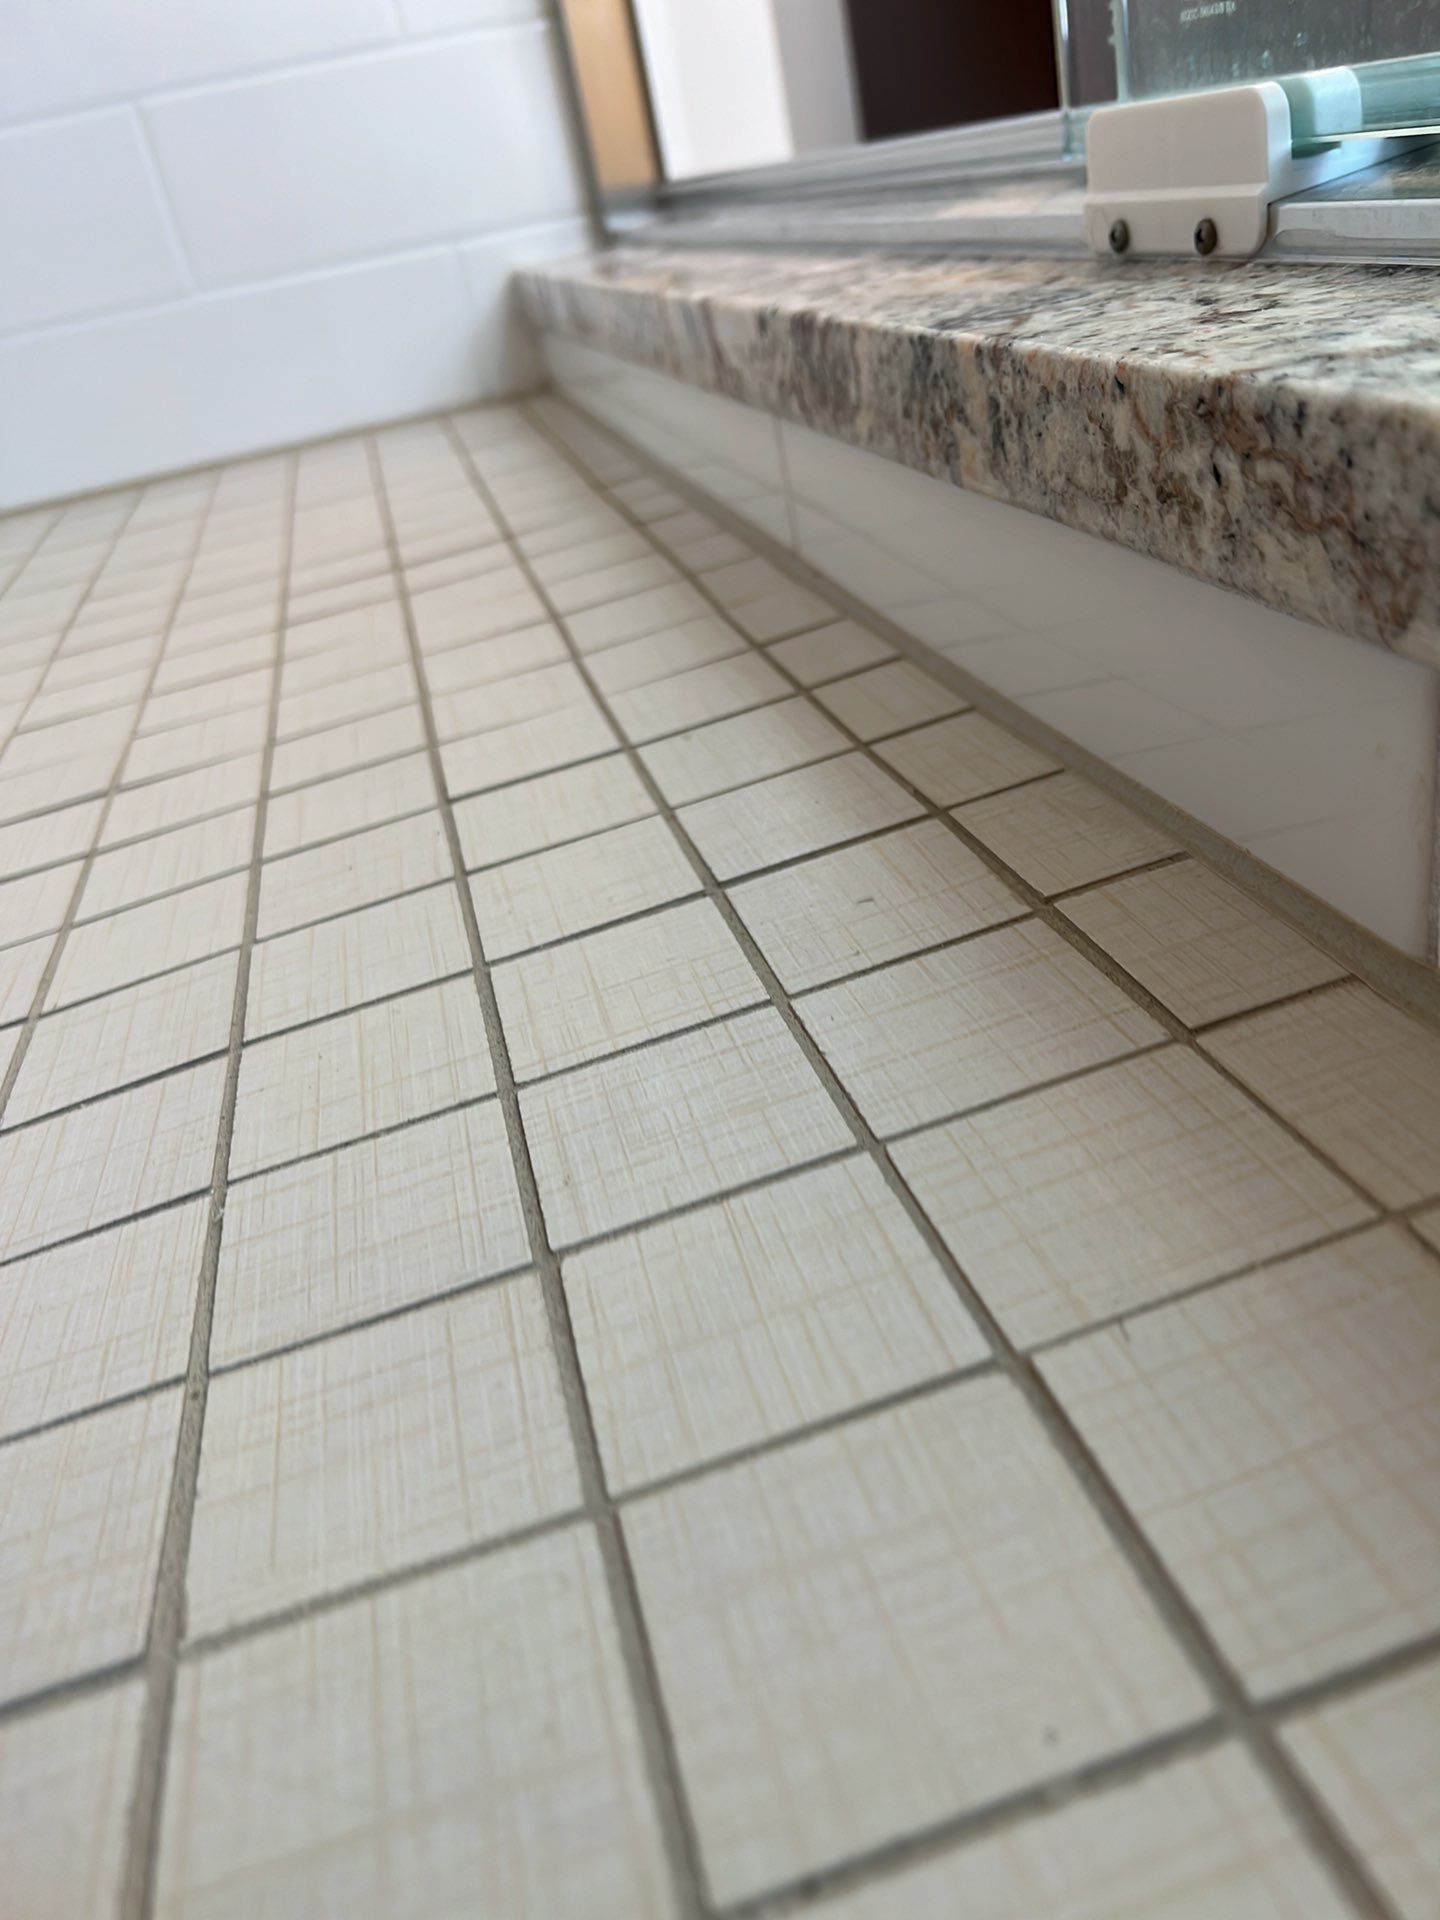 Best Tile Cleaning Service in Philadelphia, PA, Revolutionizes Grout and Tile Restoration